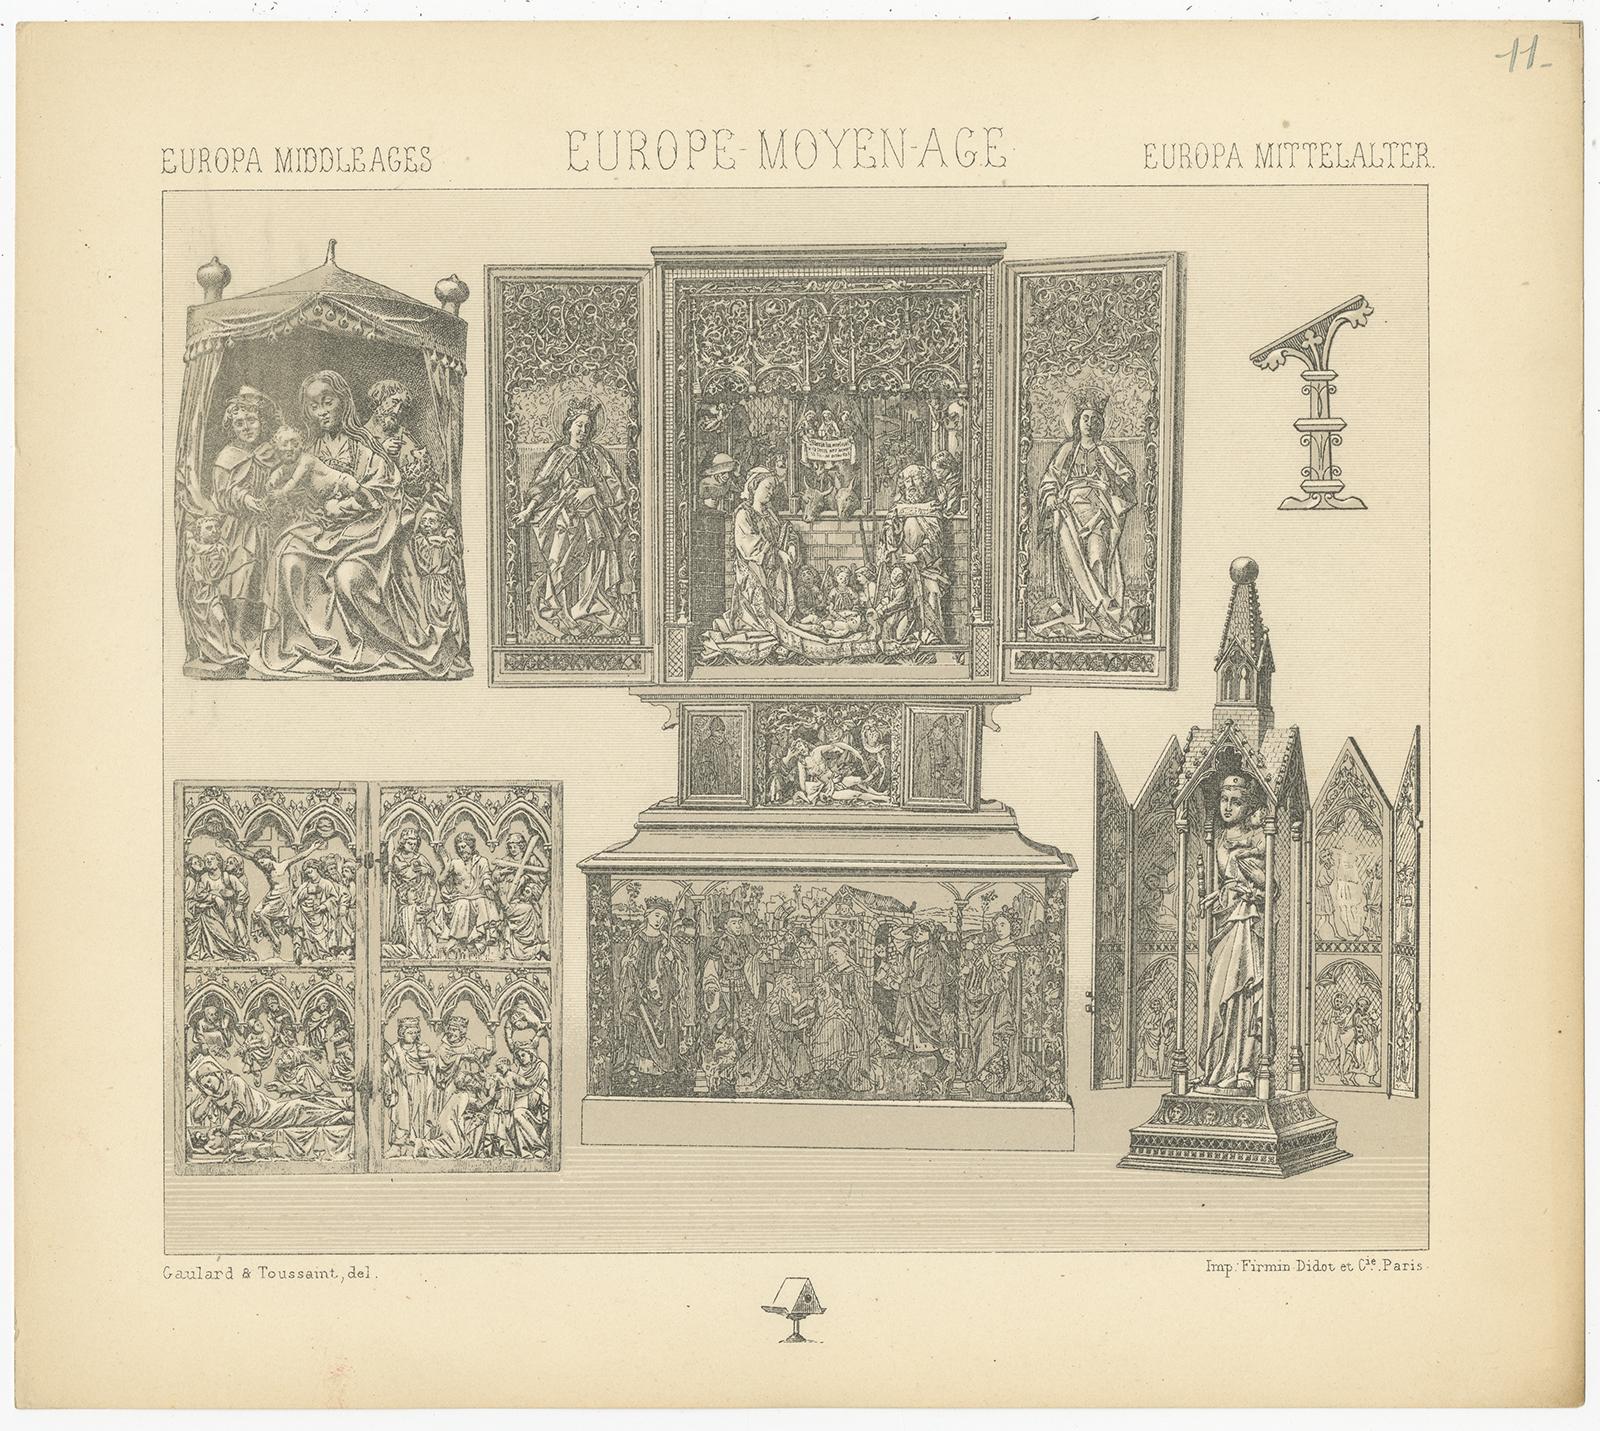 Antique print titled 'Europa Middle Ages - Europe Moyen Age - Europa Mittelalter'. Chromolithograph of European Decorative Objects. This print originates from 'Le Costume Historique' by M.A. Racinet. Published, circa 1880.